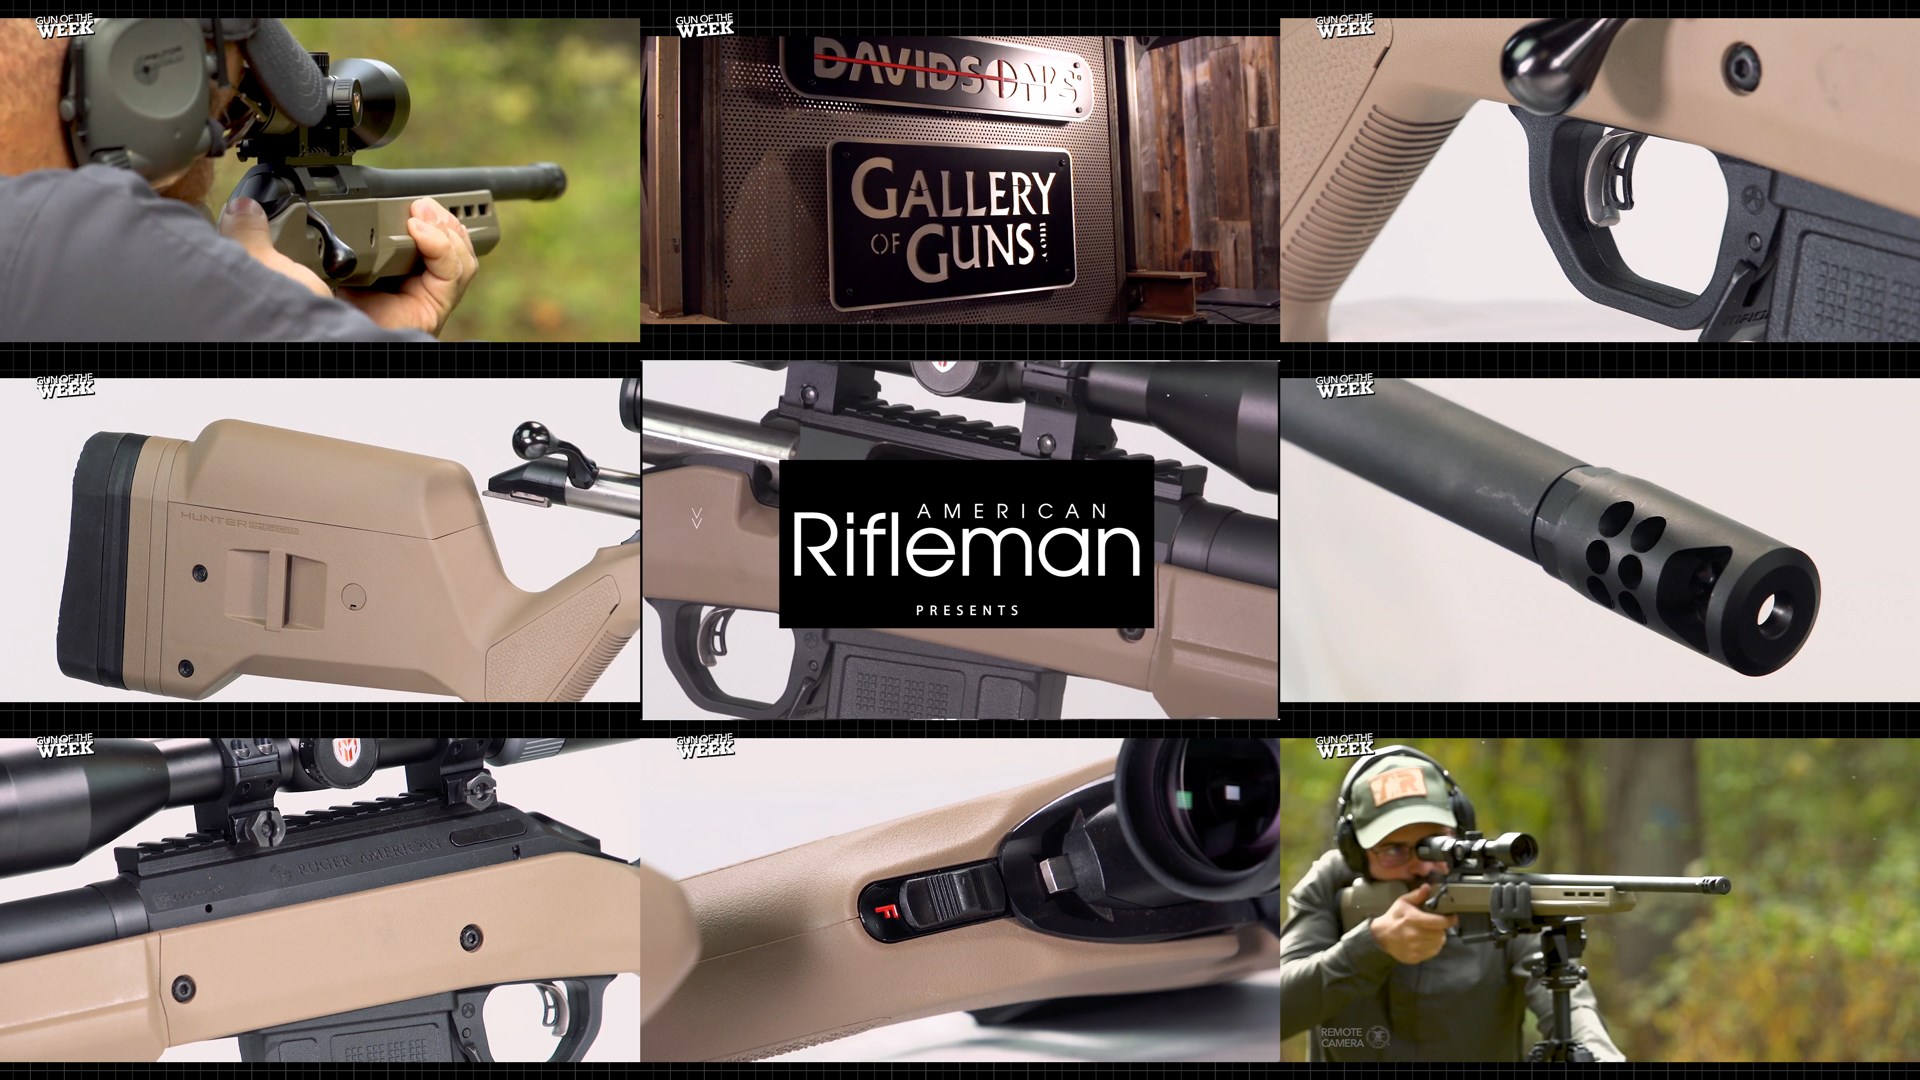 TEXT ON IMAGE DAVIDSON's GALLERY OF GUNS AMERICAN RIFLEMAN PRESENTS tiles arrangment nine 9 images stack grid gun bolt-action Ruger American Hunter rifle man outdoors shooting